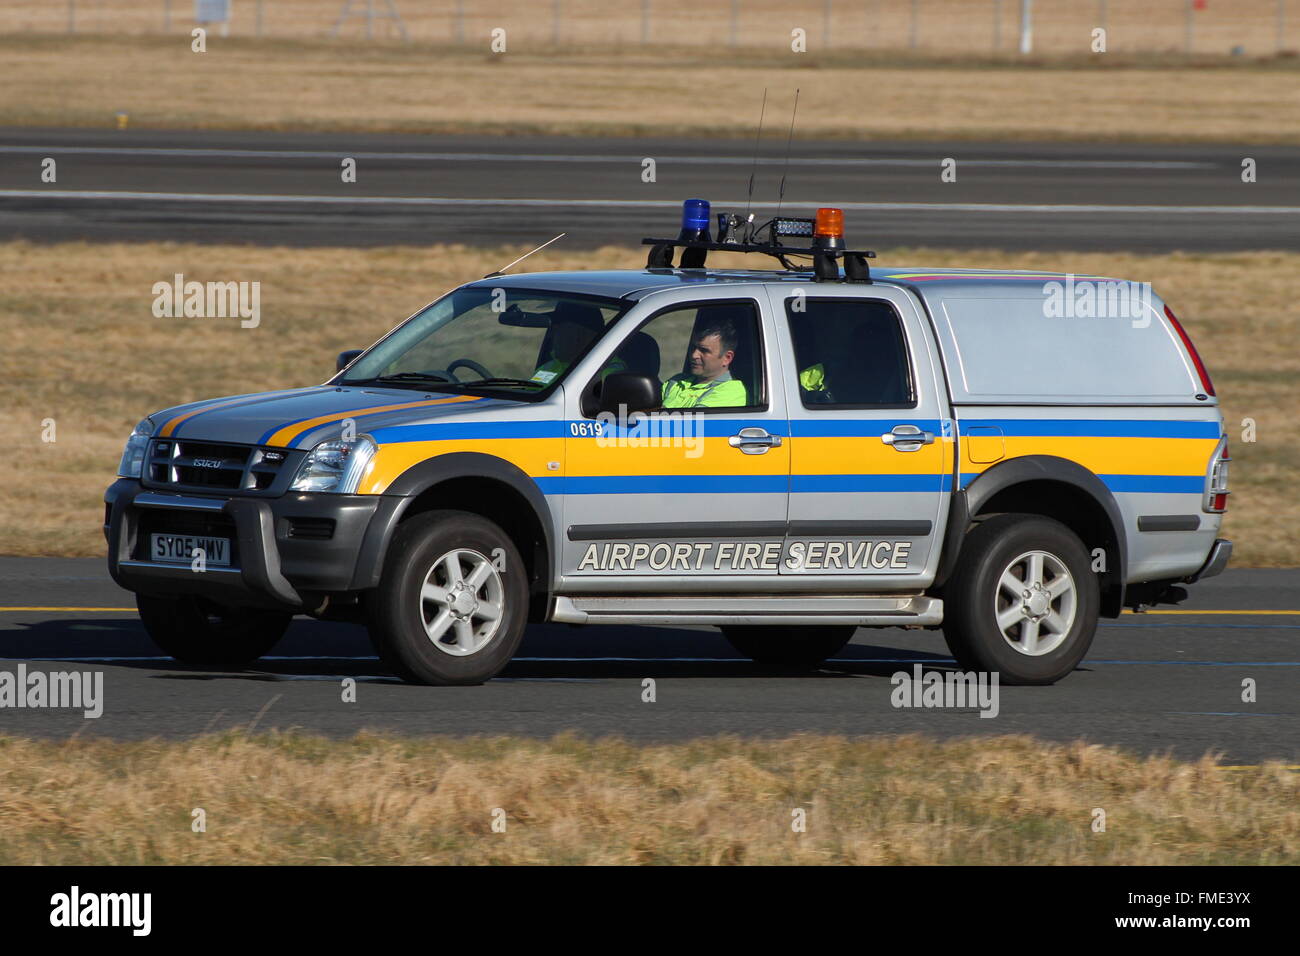 0619 (SY05 WMV), an Isuzu D-Max Rodeo of the Prestwick Airport Fire Service department. Stock Photo